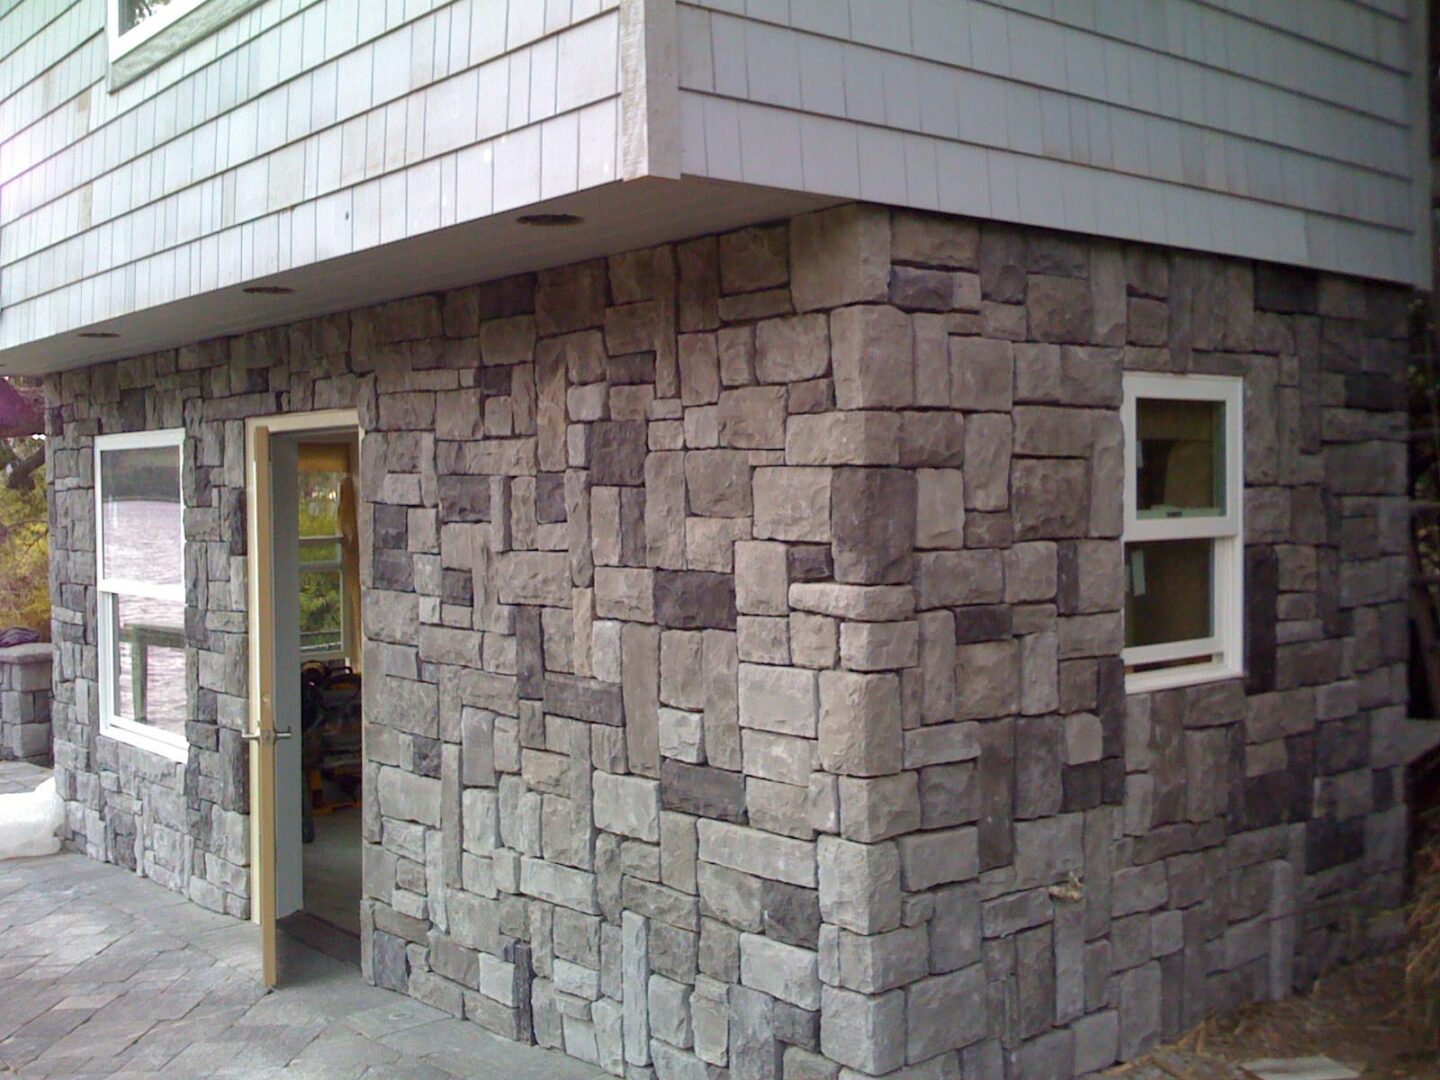 A building with stone walls and a door.